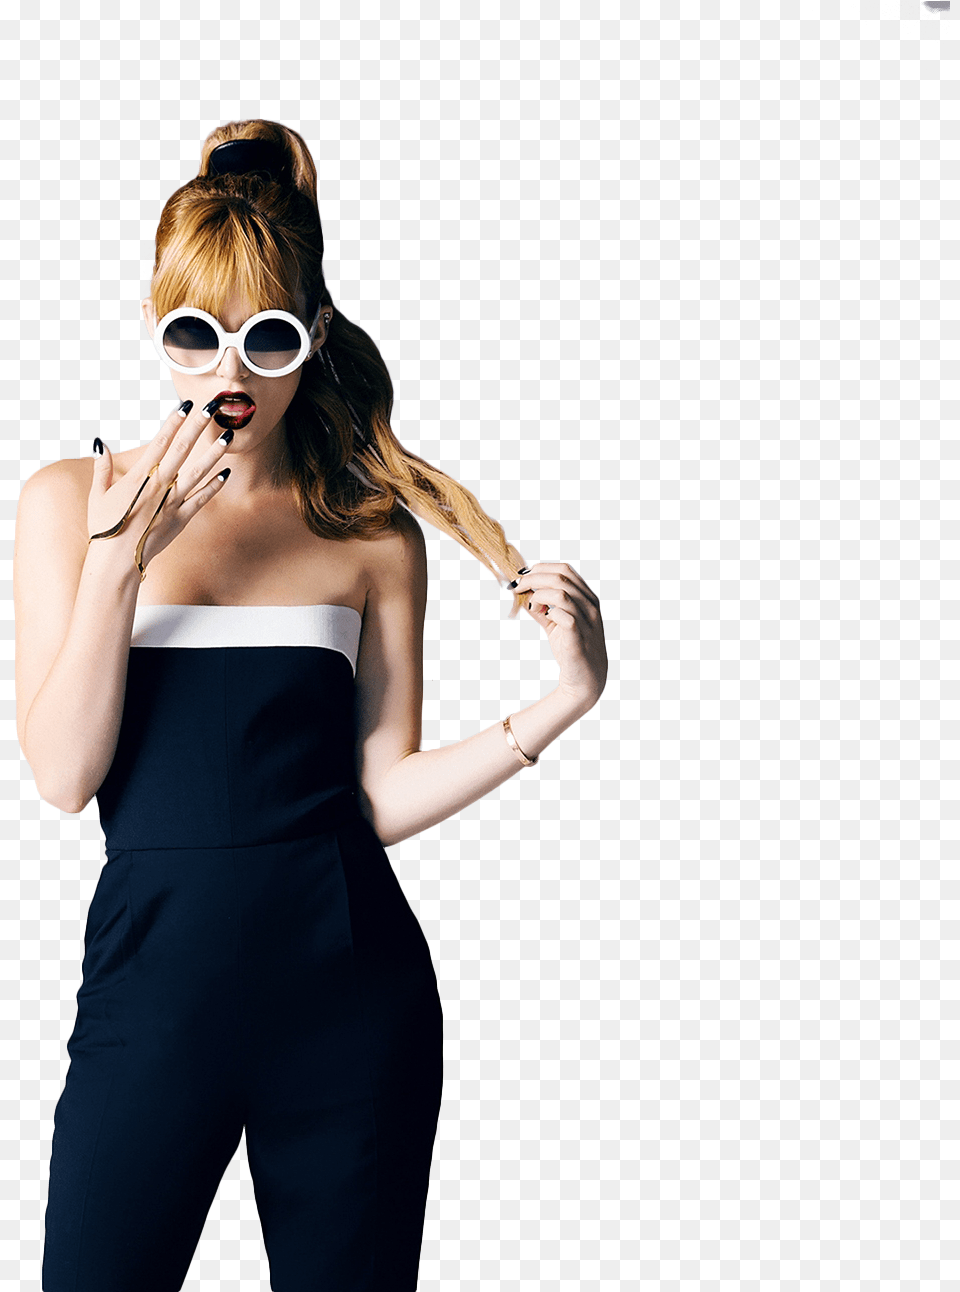 Bella Thorne Download Bella Thorne Actres, Accessories, Sunglasses, Portrait, Photography Free Png